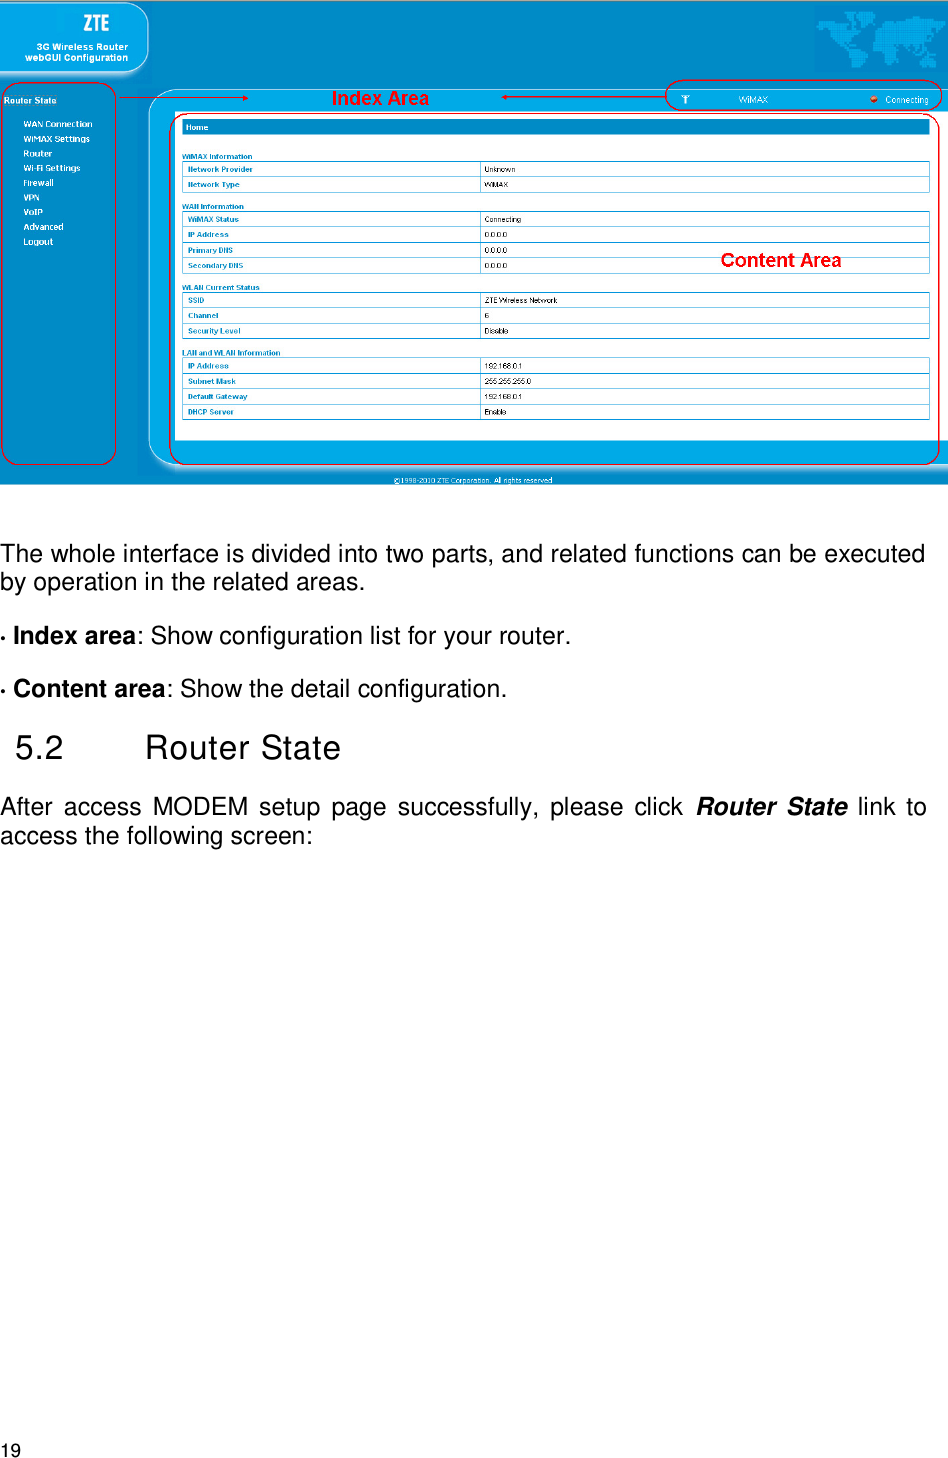 19    The whole interface is divided into two parts, and related functions can be executed by operation in the related areas. • Index area: Show configuration list for your router.   • Content area: Show the detail configuration. 5.2  Router State After  access  MODEM setup  page  successfully,  please  click  Router State  link to access the following screen: 